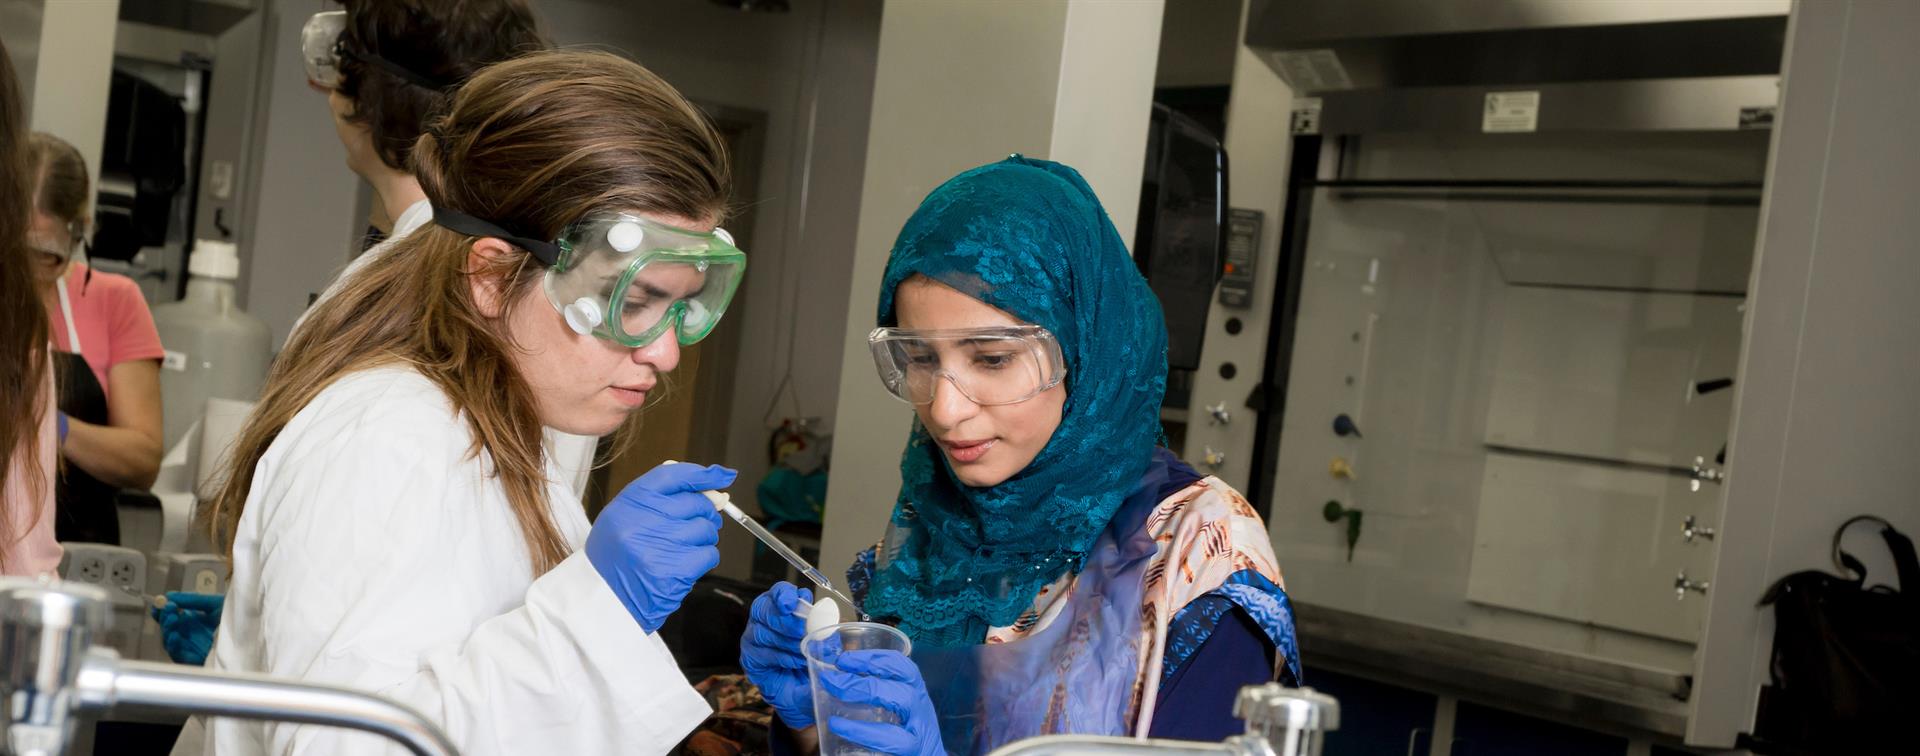 A picture of two women in a lab running an experiment